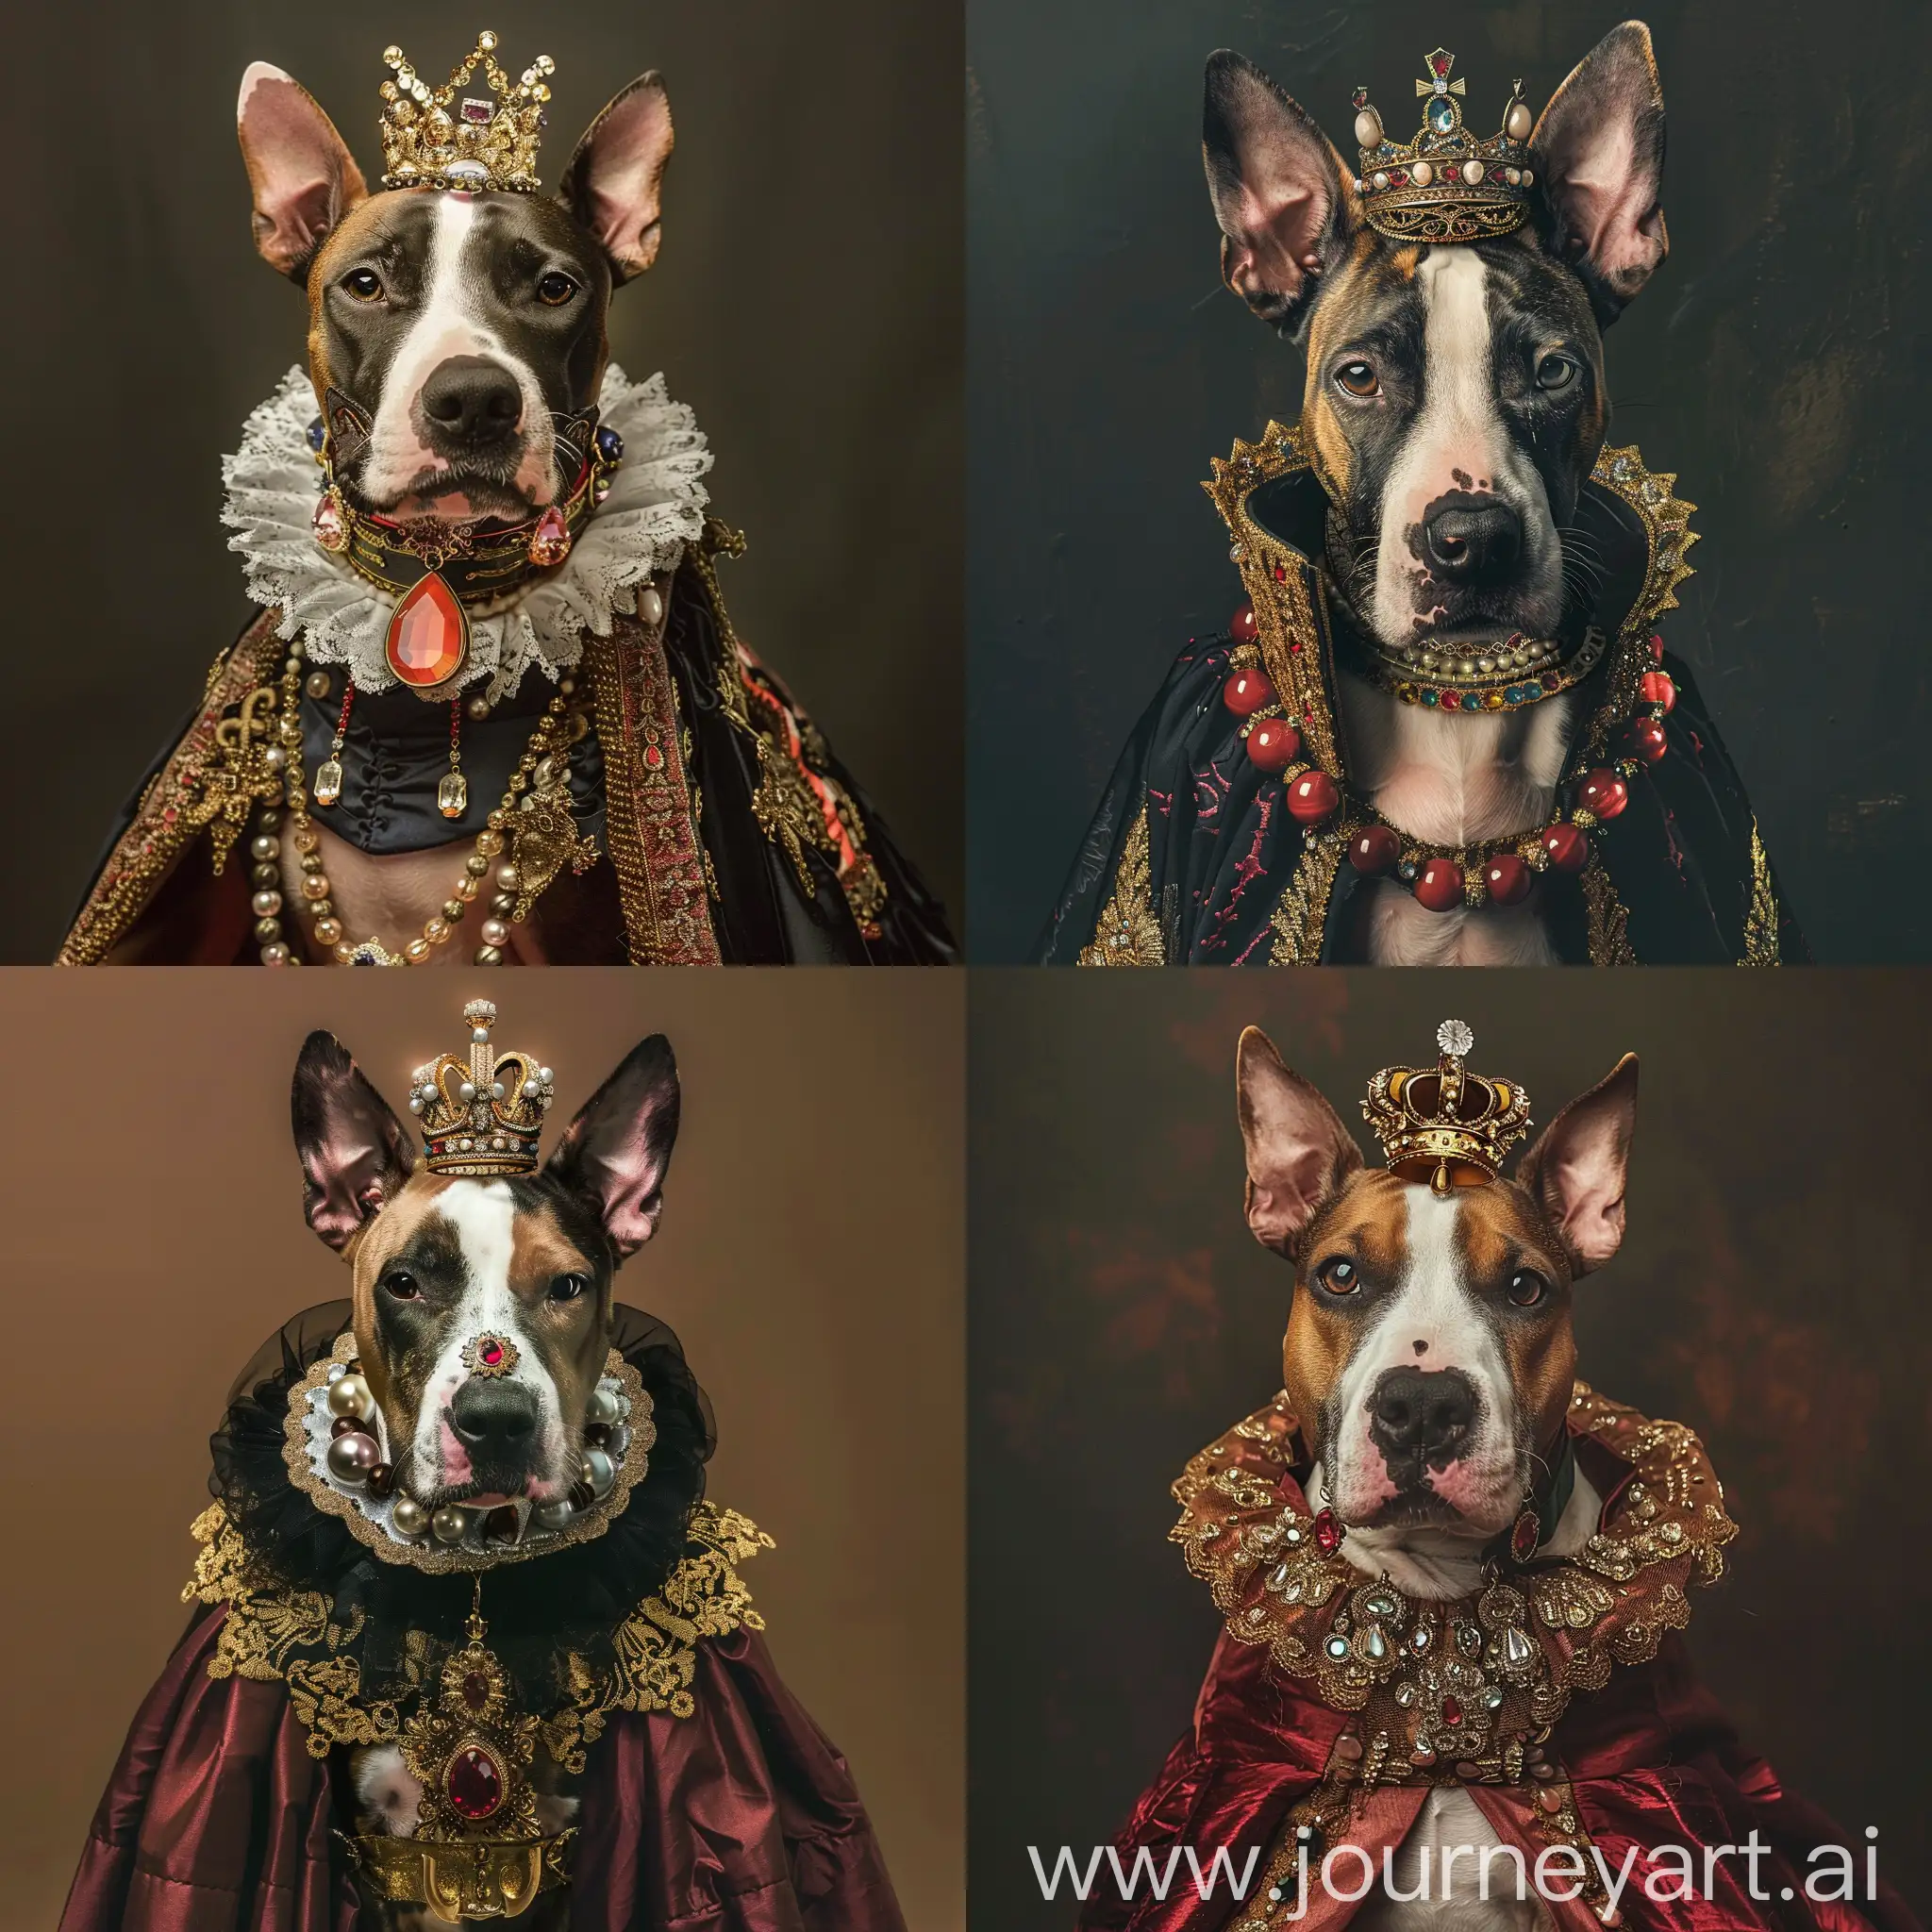 Tri Coloured English Bull Terrier dressed as a victorian queen with jewels and crown